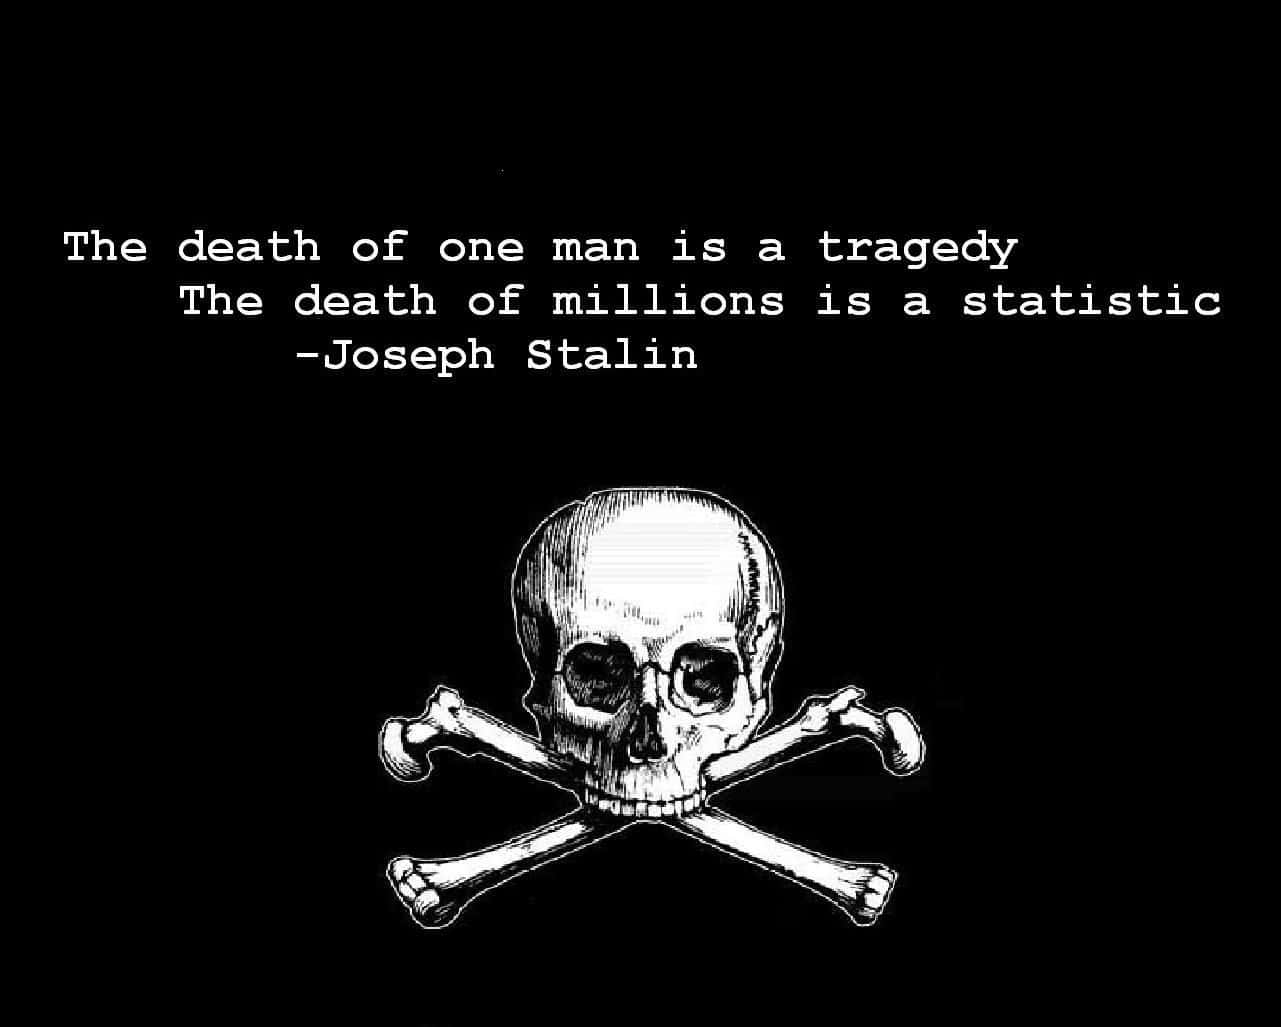 Stalin Quote Tragedy Statistic Wallpaper